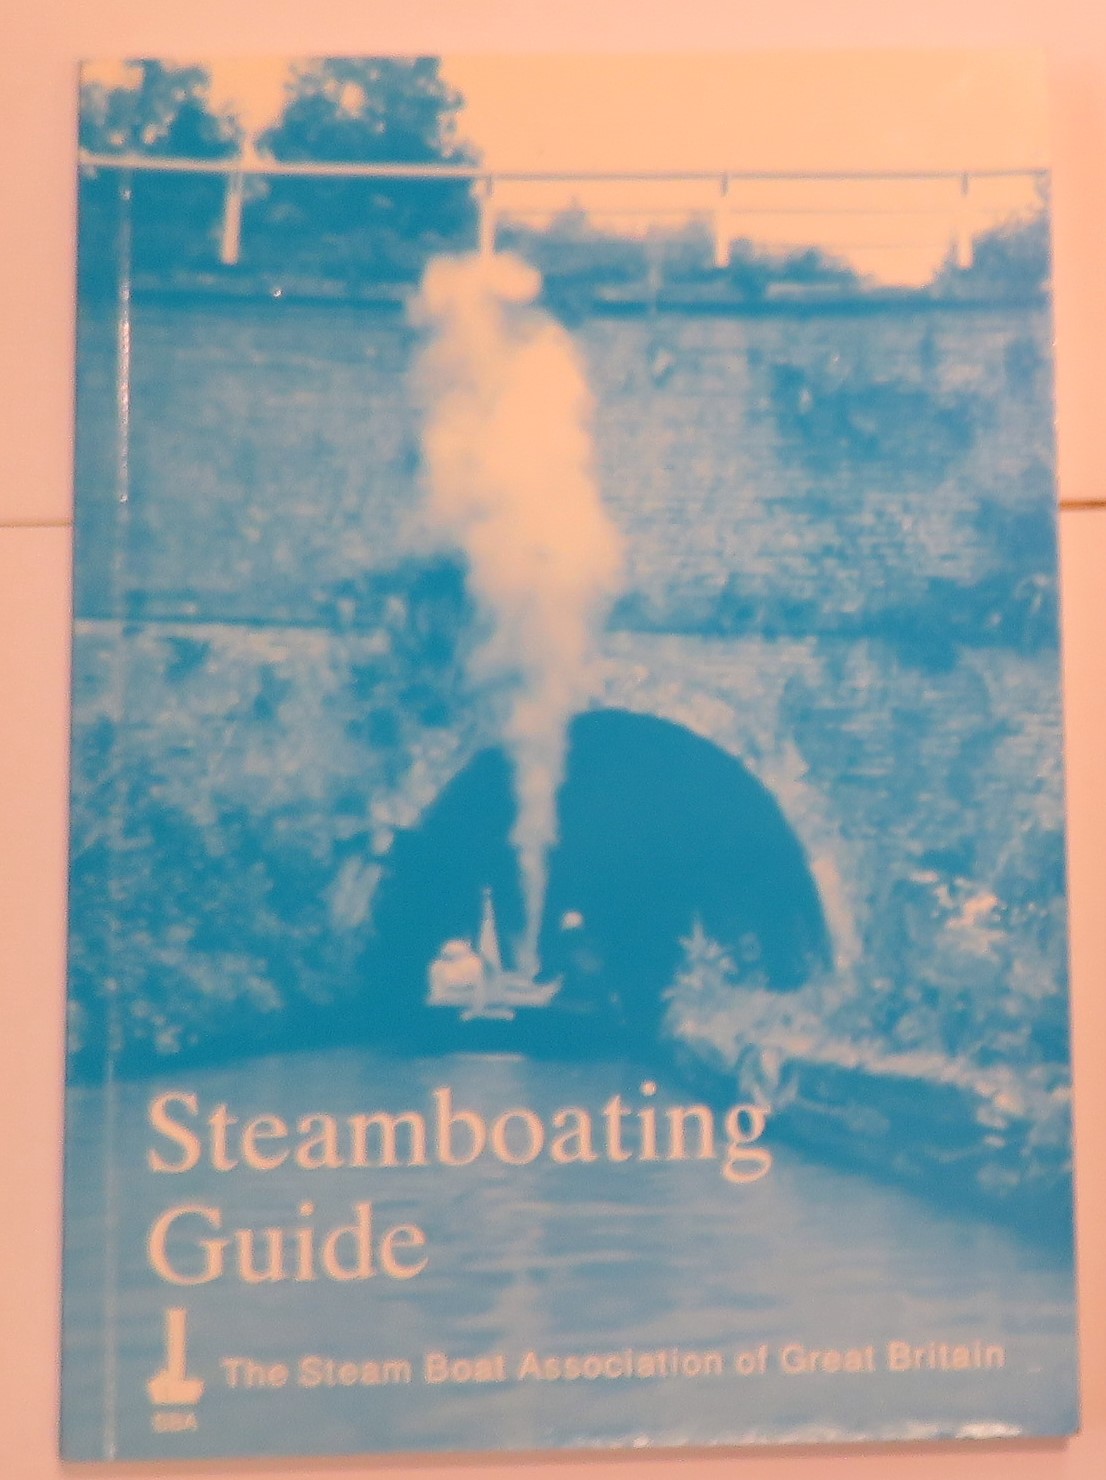 Steamboating Guide